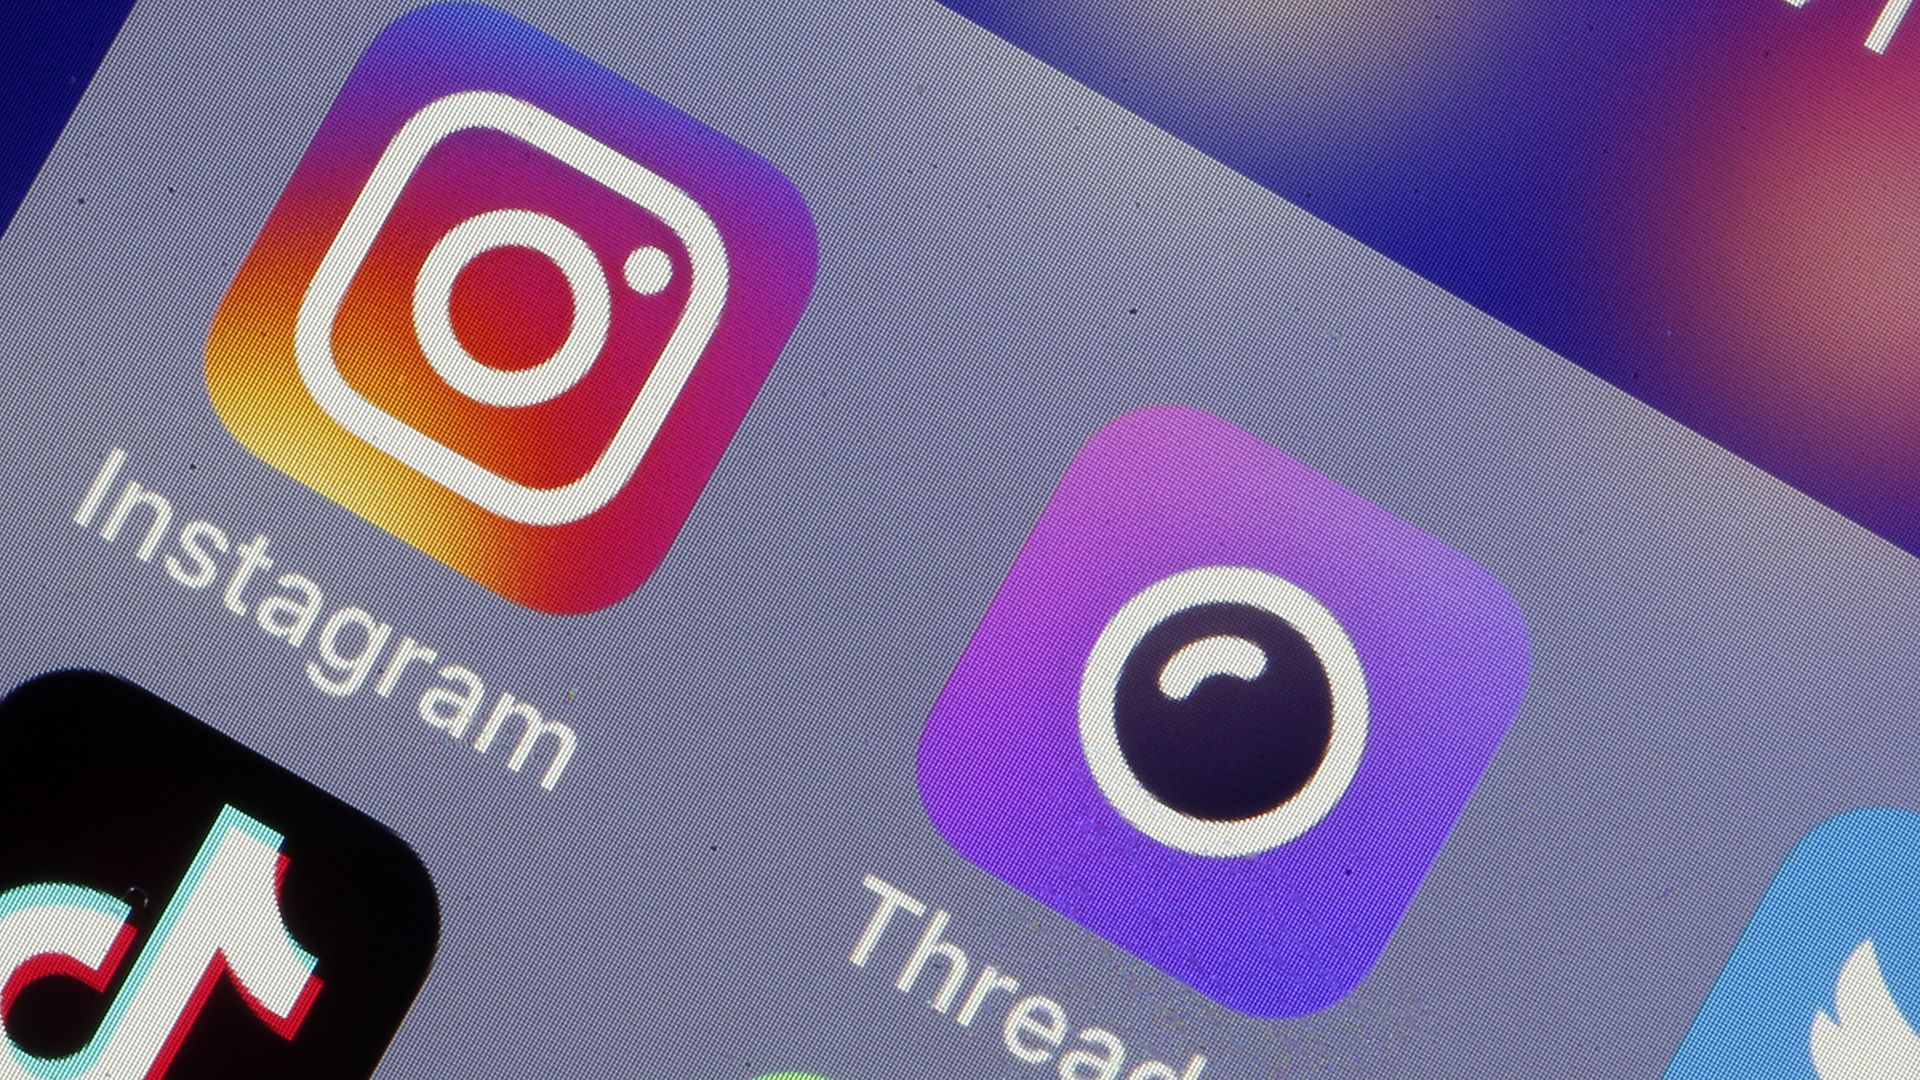 This image is a screenshot of a phone with the Instagram logo featured.